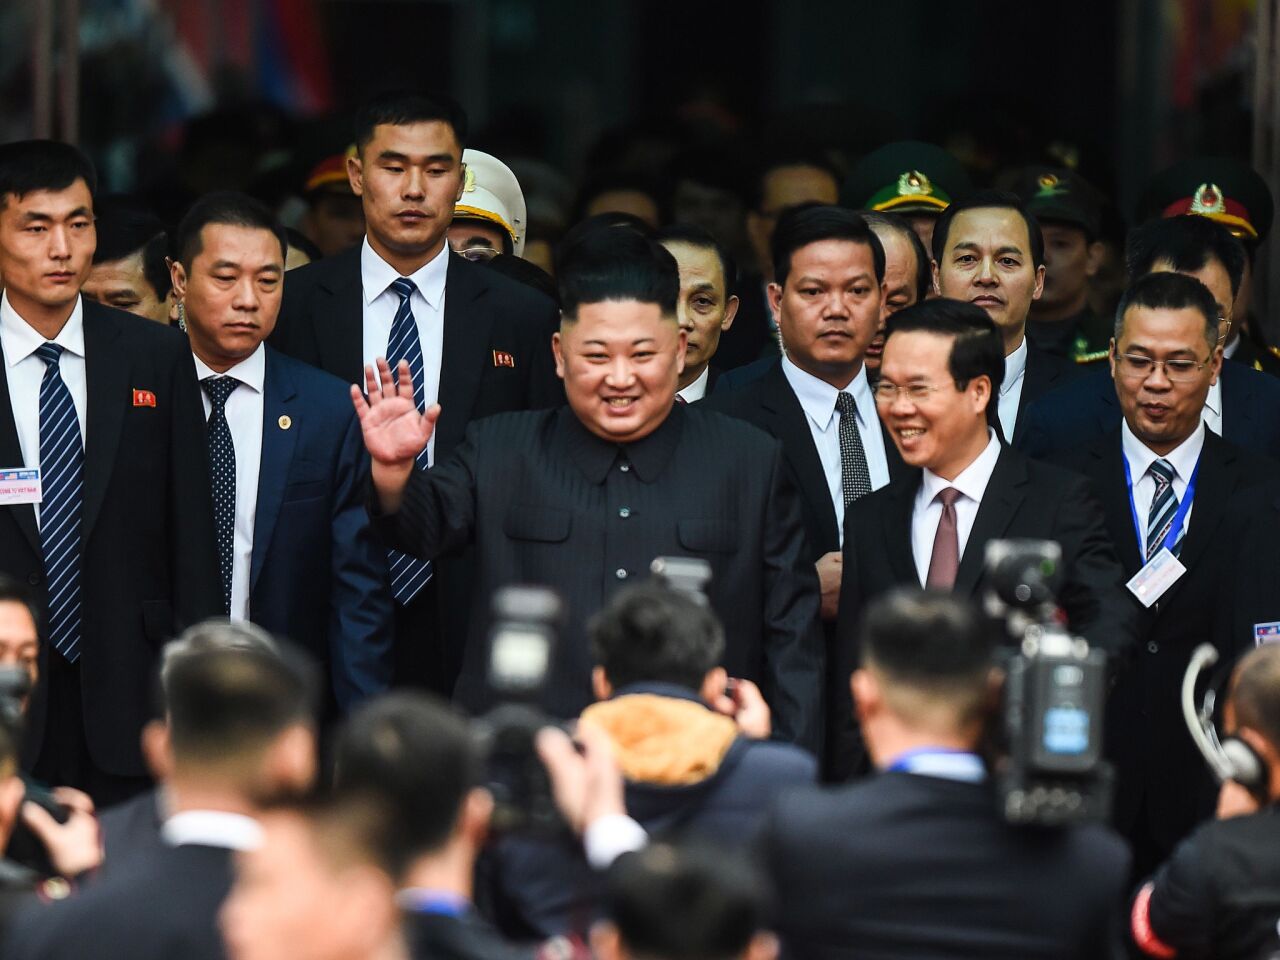 North Korean leader Kim Jong Un arrives at the Dong Dang railway station on his way to the second U.S.-North Korea summit.